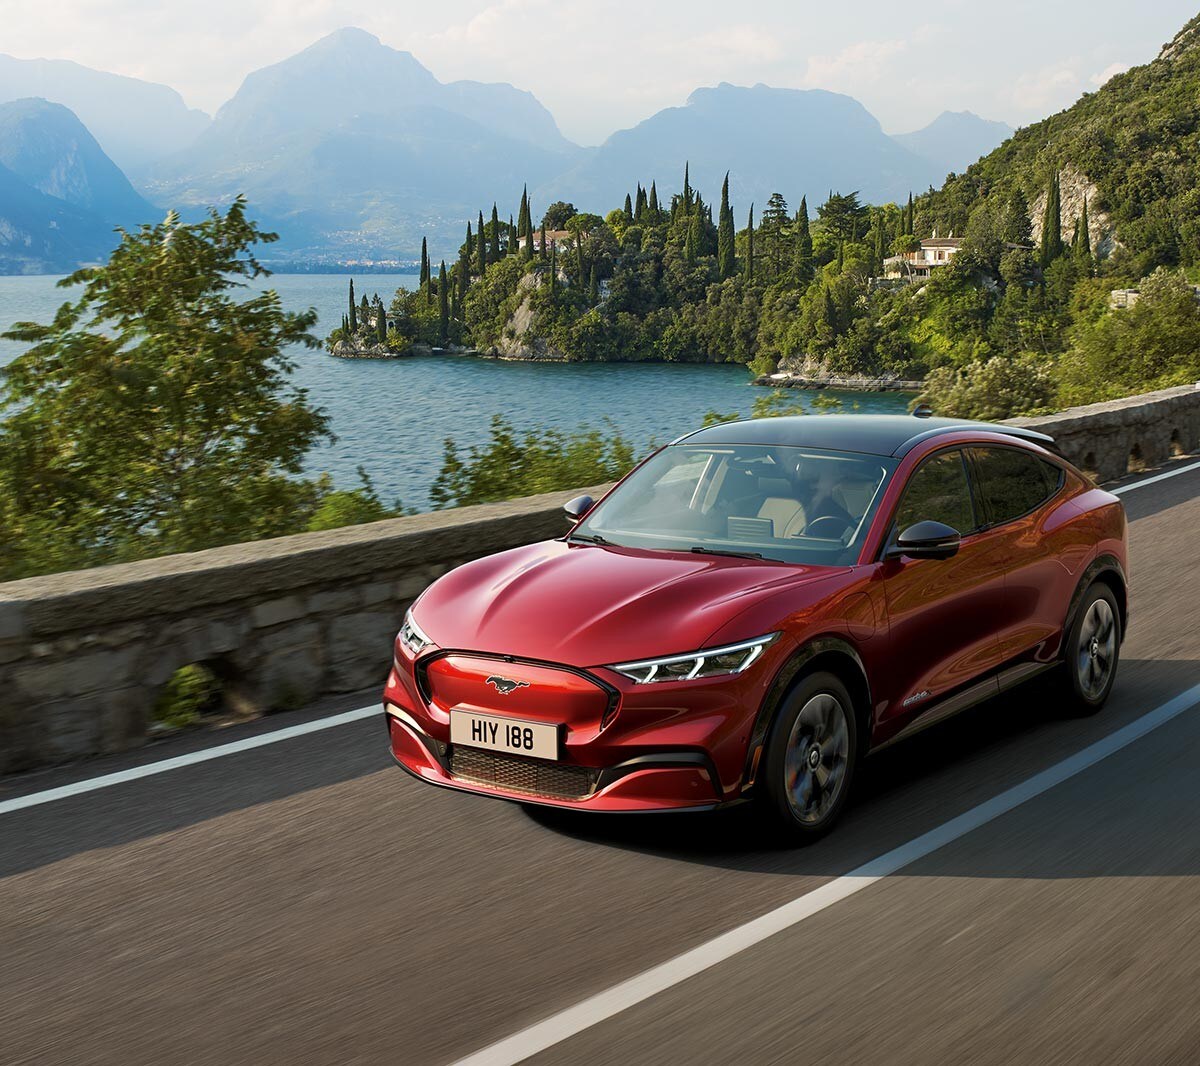 All-New Ford Mustang Mach-E driving past lake in mountains